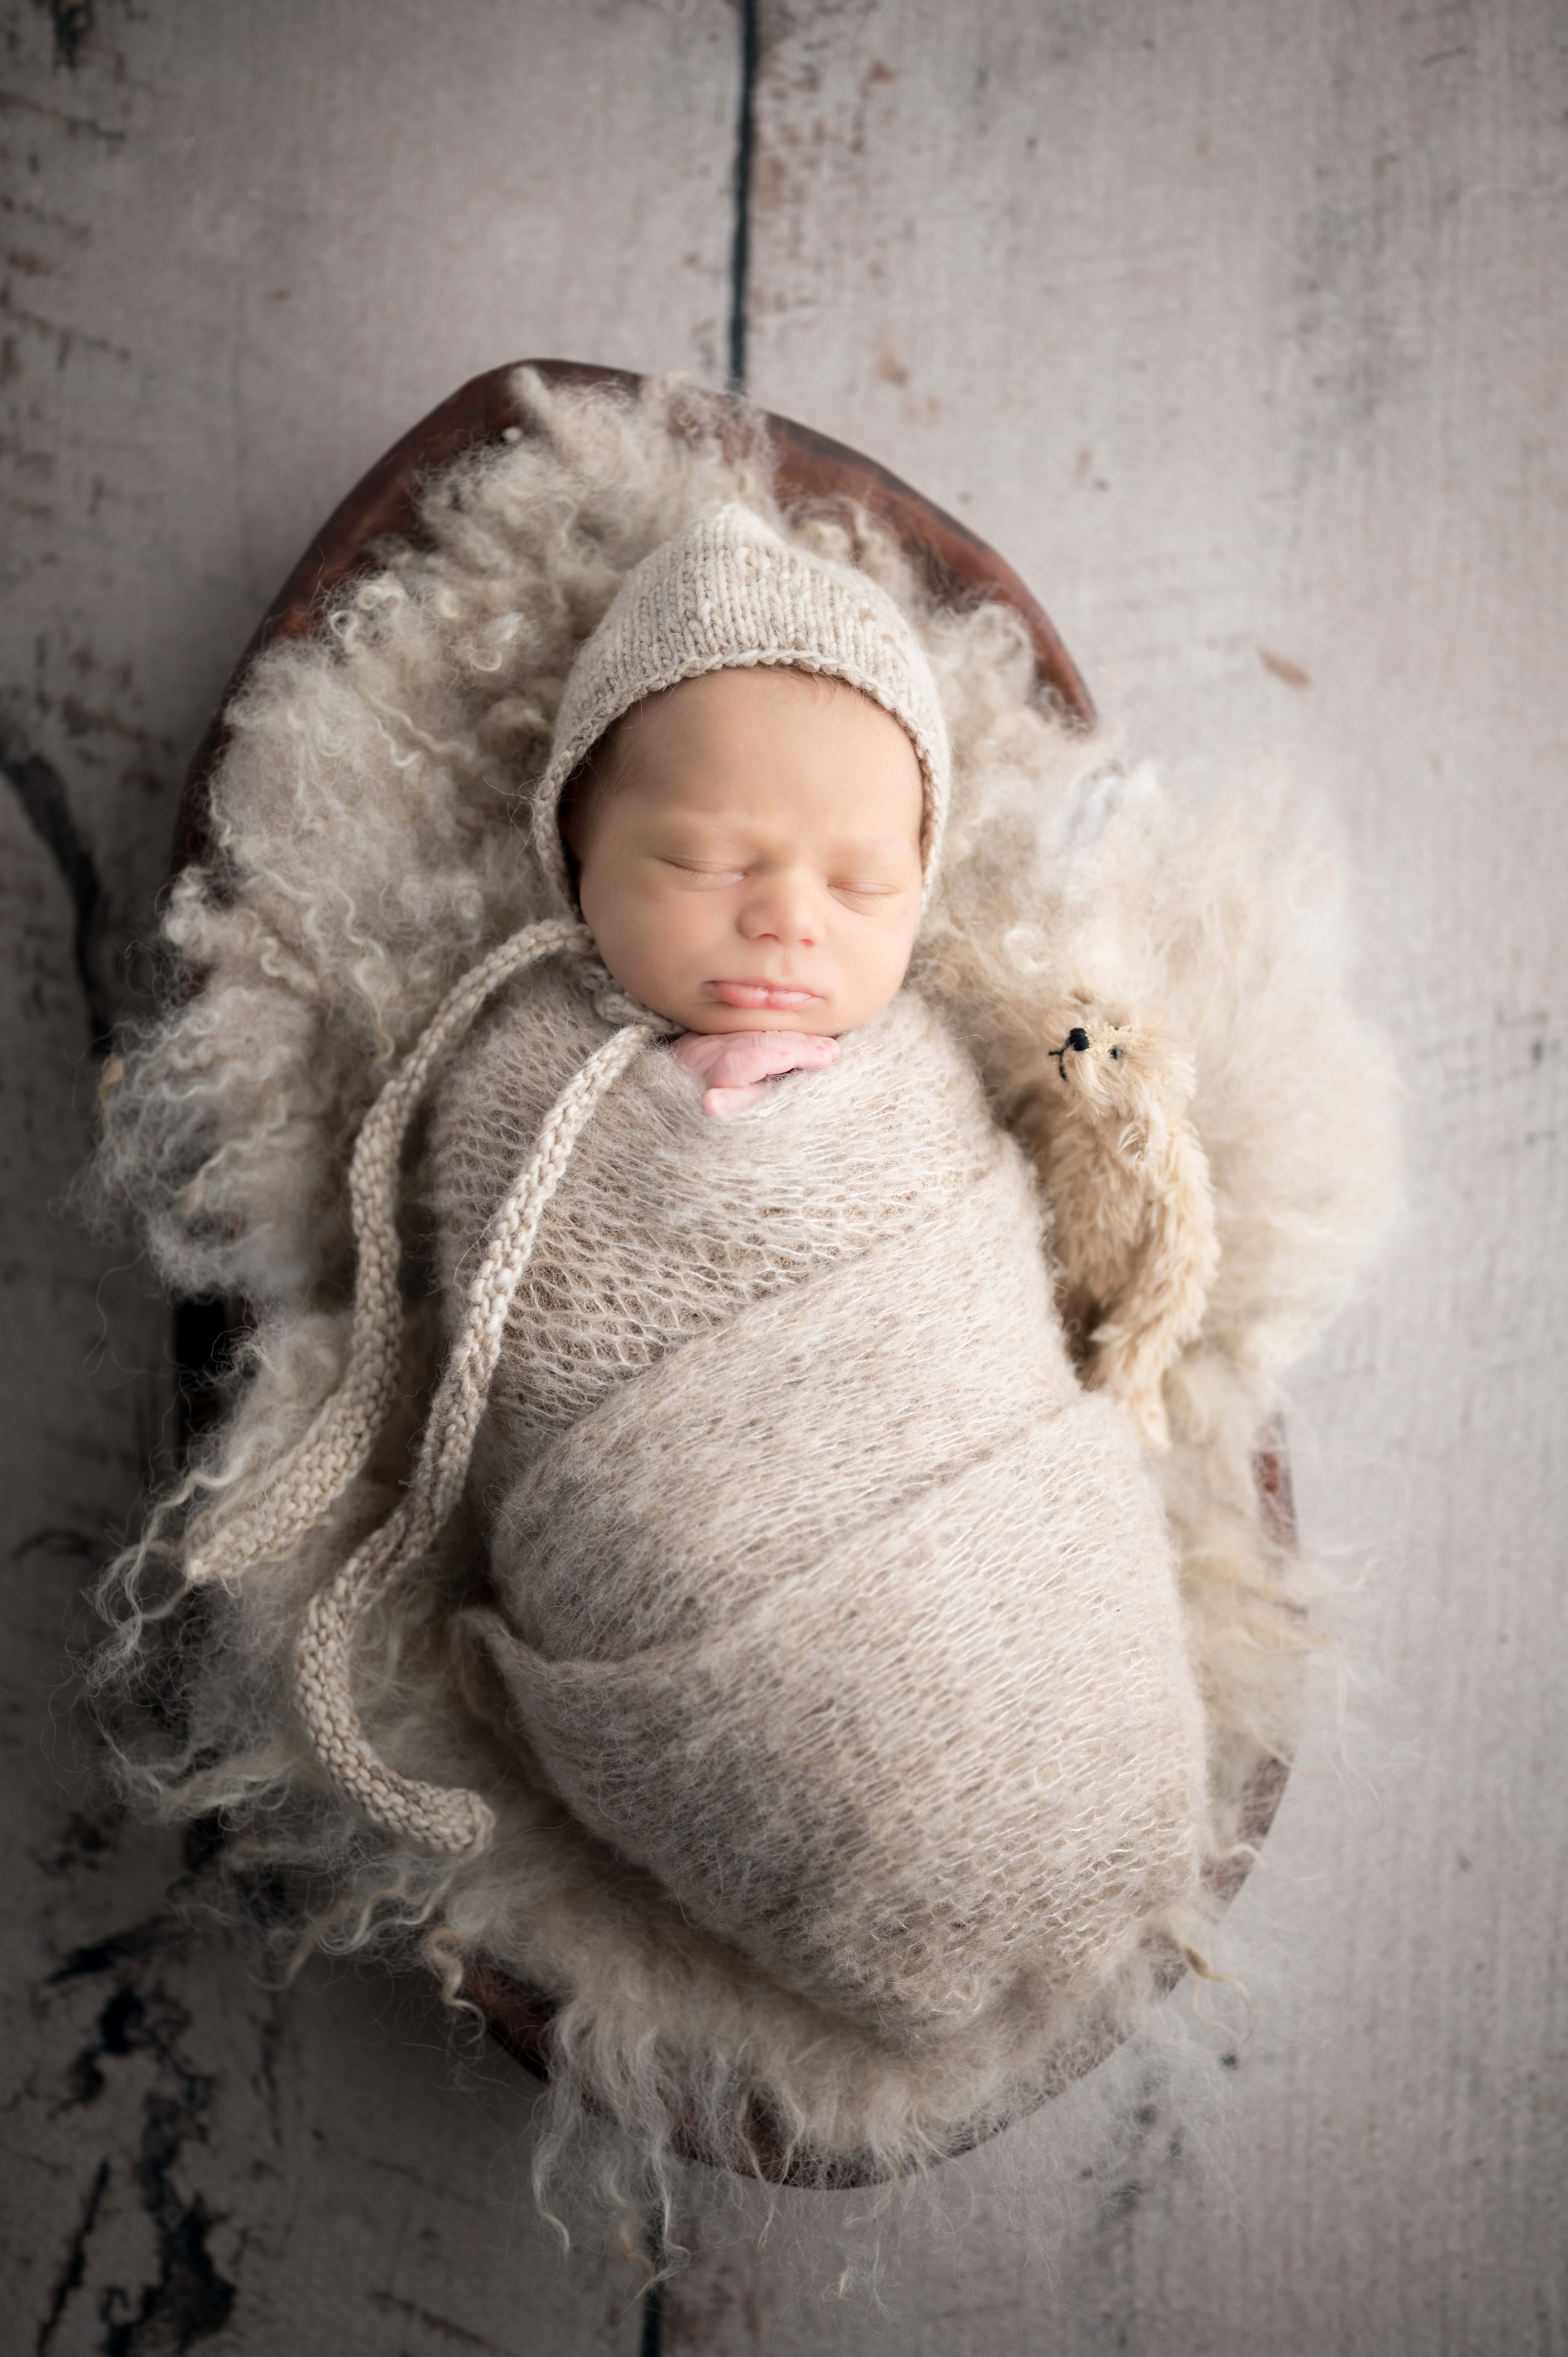 Newborn baby in neutral colors wrapped and asleep in a wooden bowl with teddy bear. 